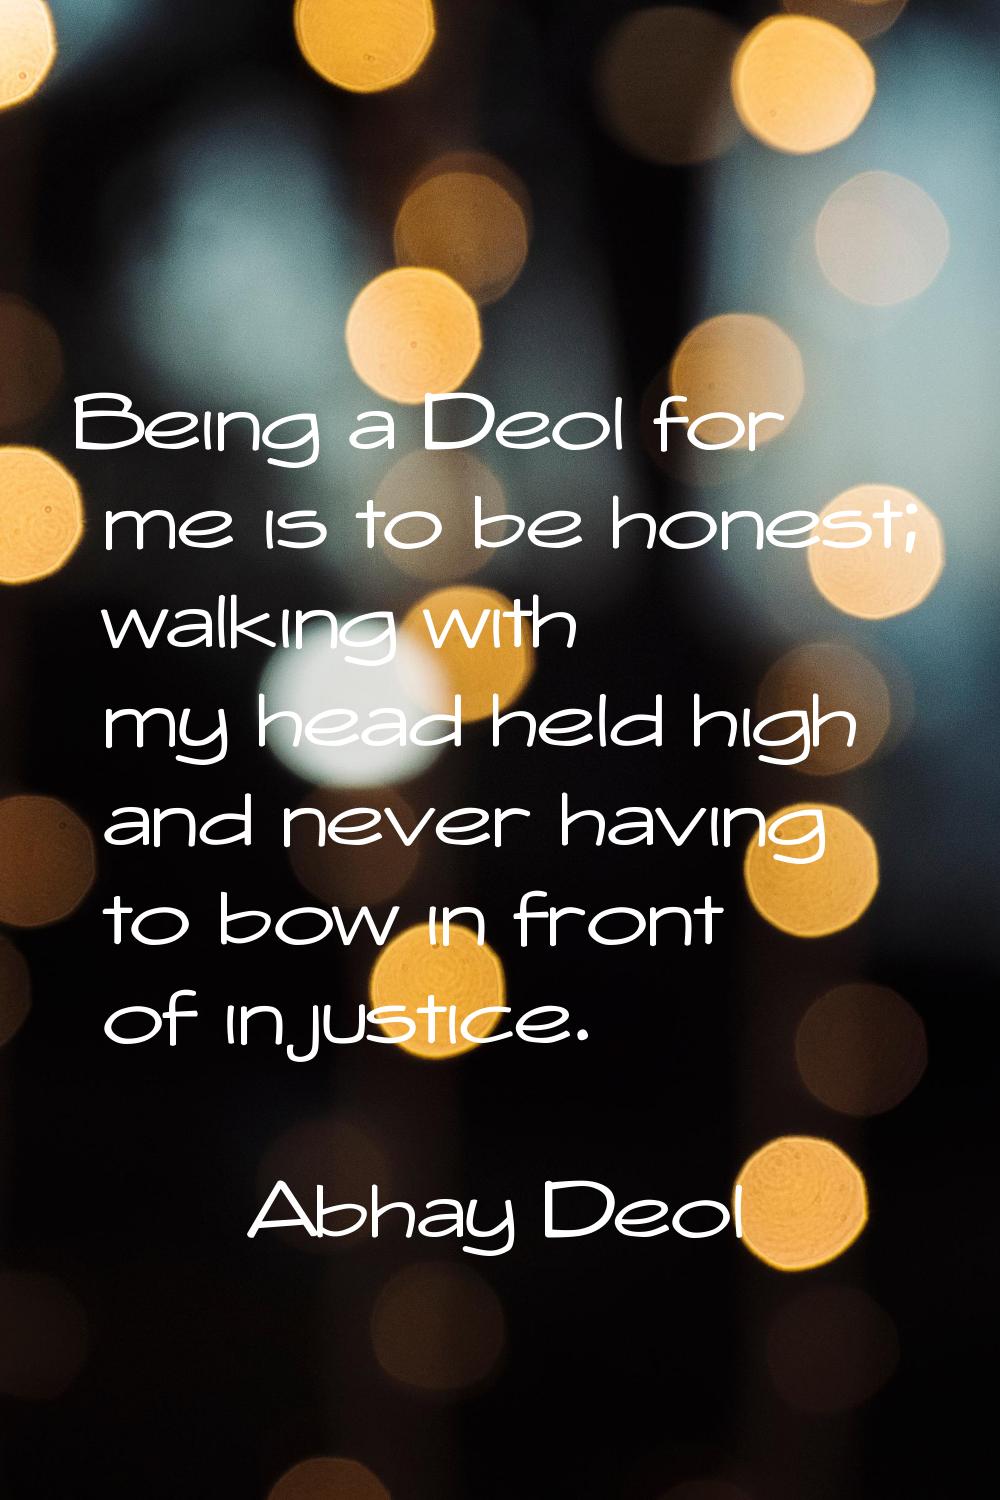 Being a Deol for me is to be honest; walking with my head held high and never having to bow in fron